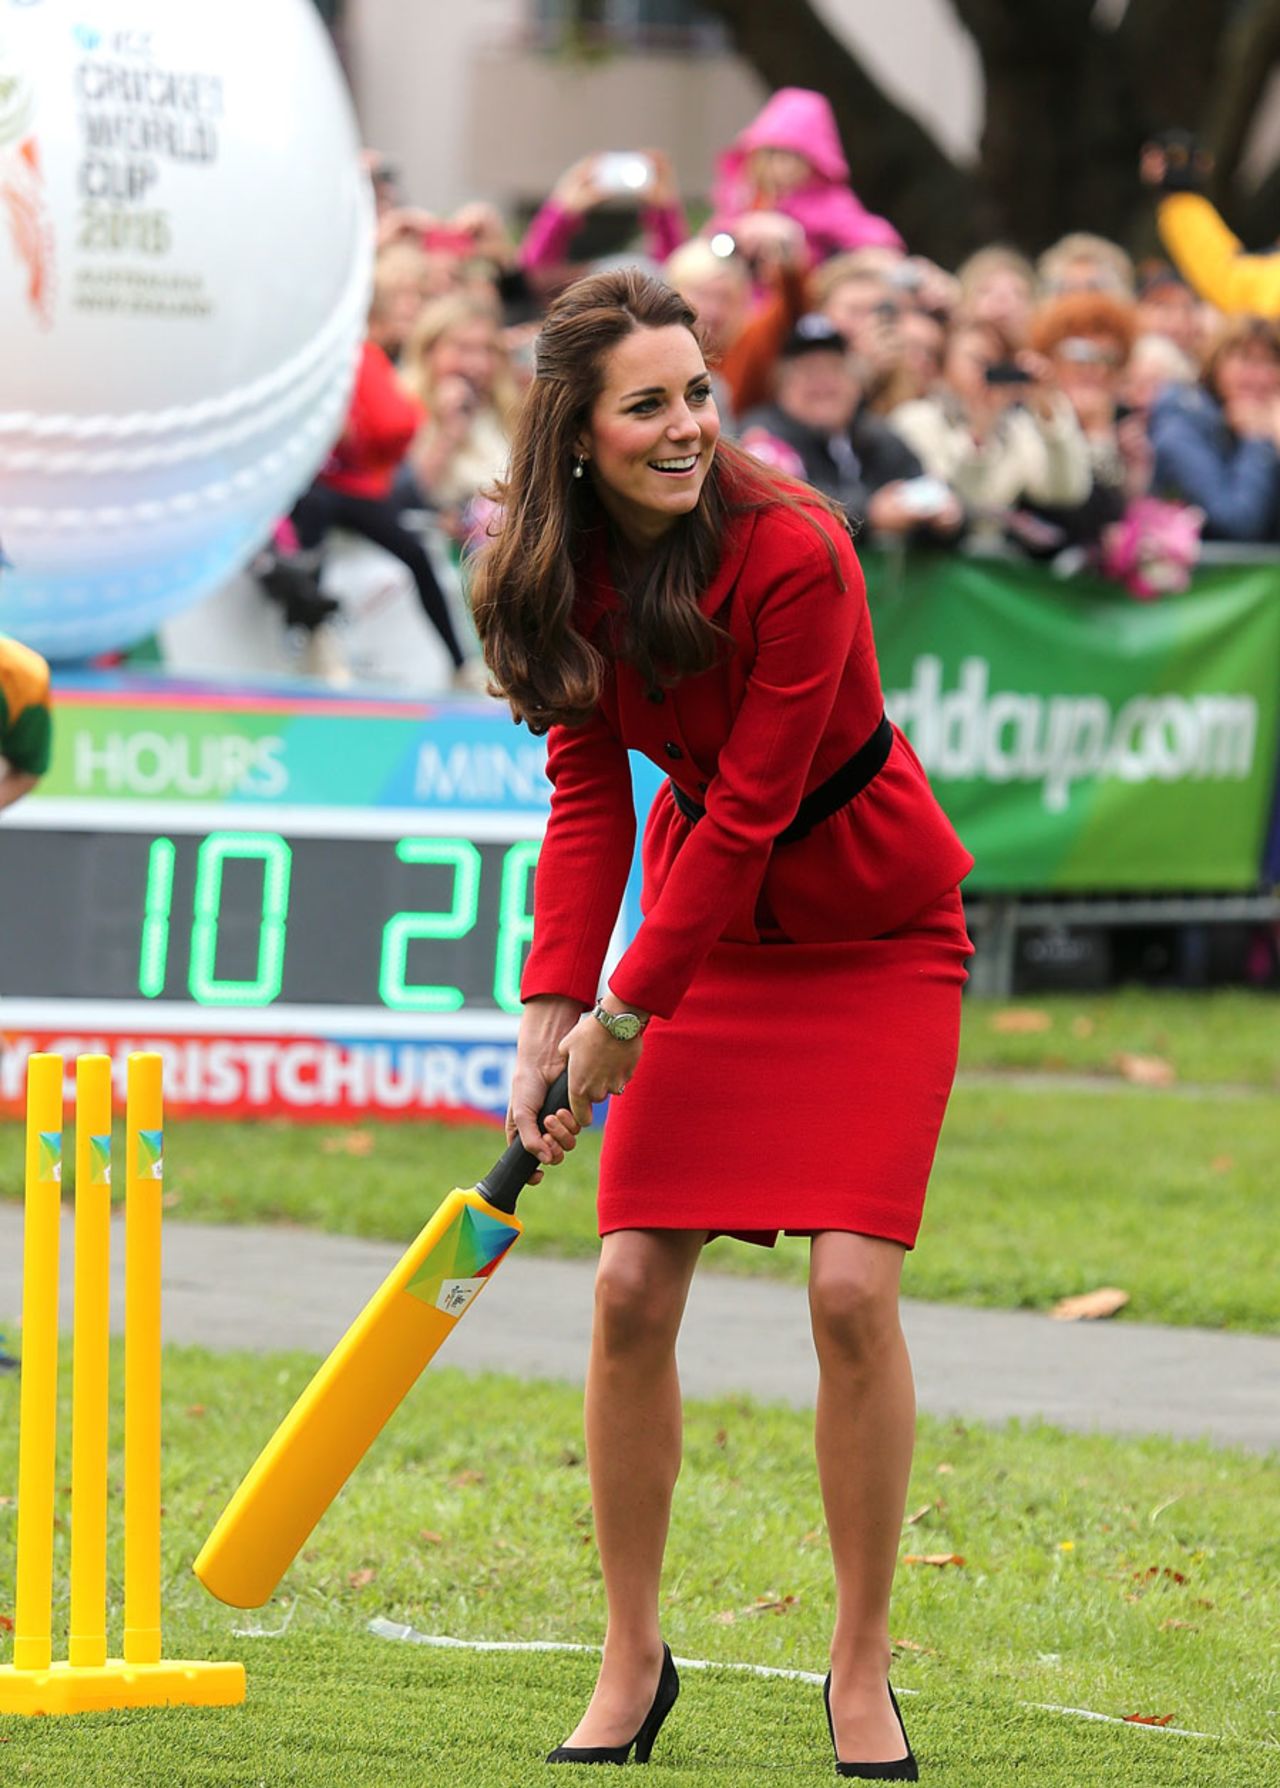 Kate Middleton, the Duchess of Cambridge, takes part in a friendly game in Christchurch as part of the countdown to the 2015 World Cup, April 14, 2014